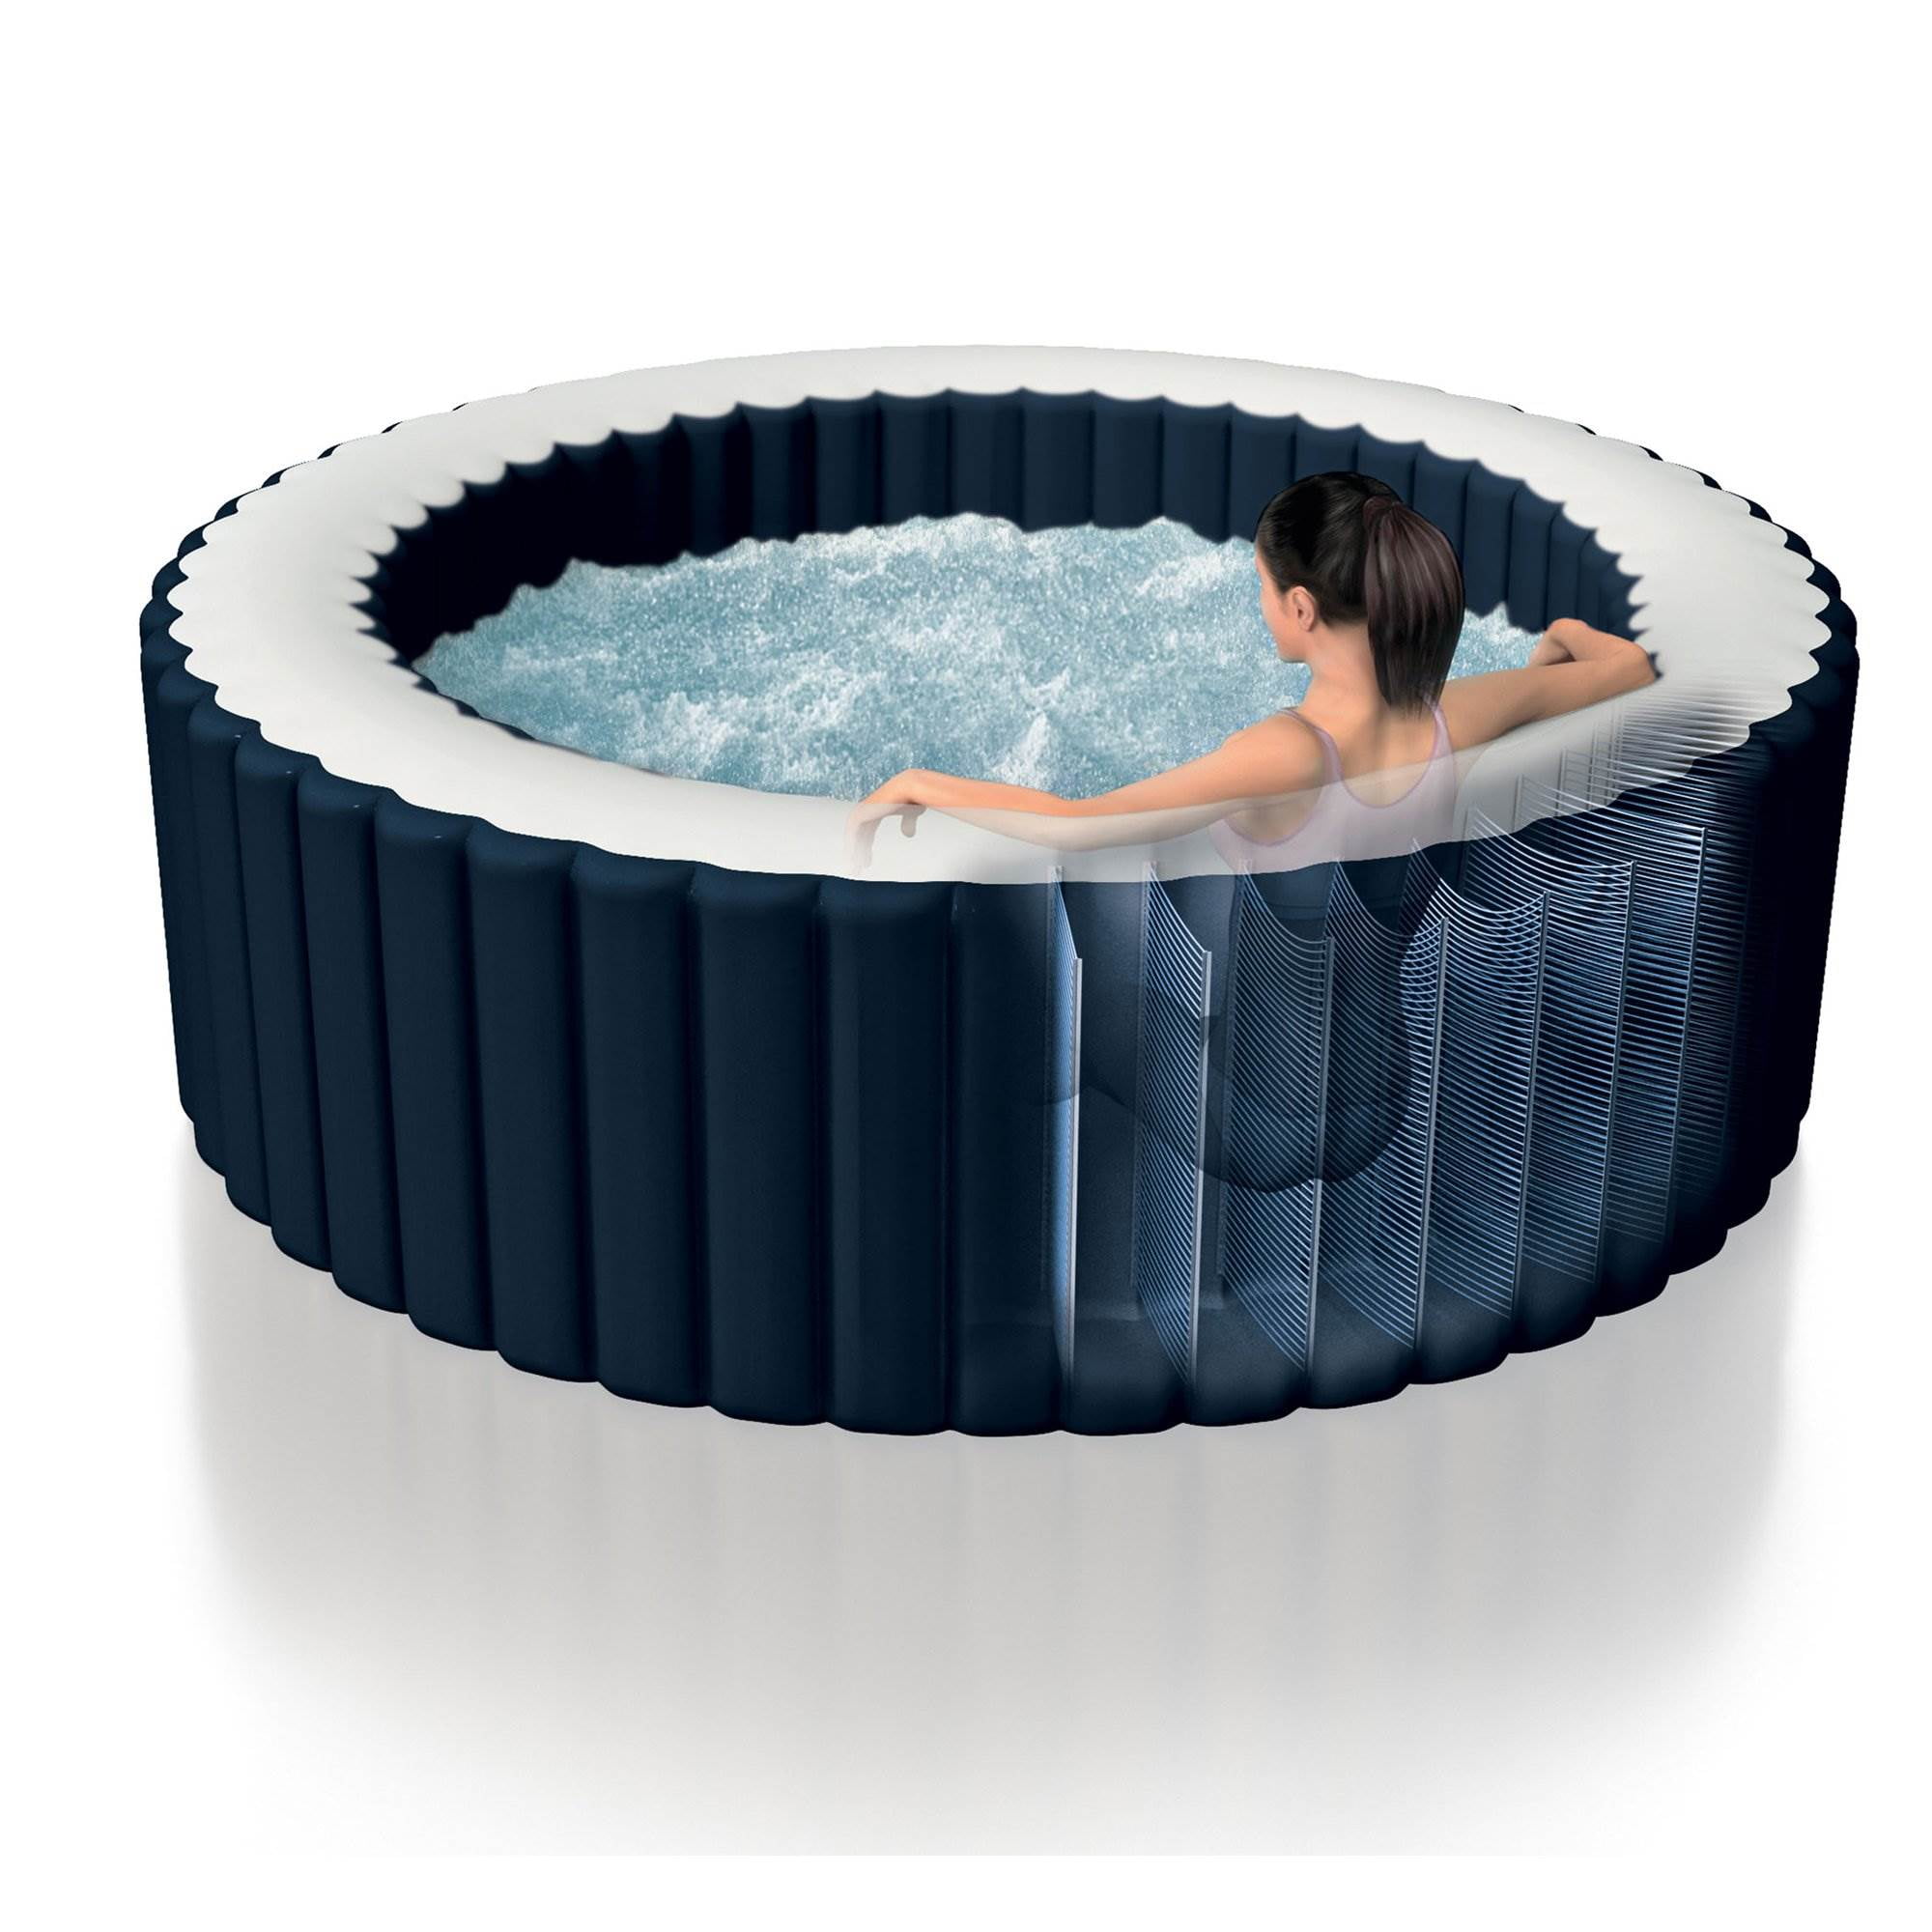 Intex 28409E Pure Spa 4-Person Inflatable Heated Hot Tub with Soft Foam Headrest 